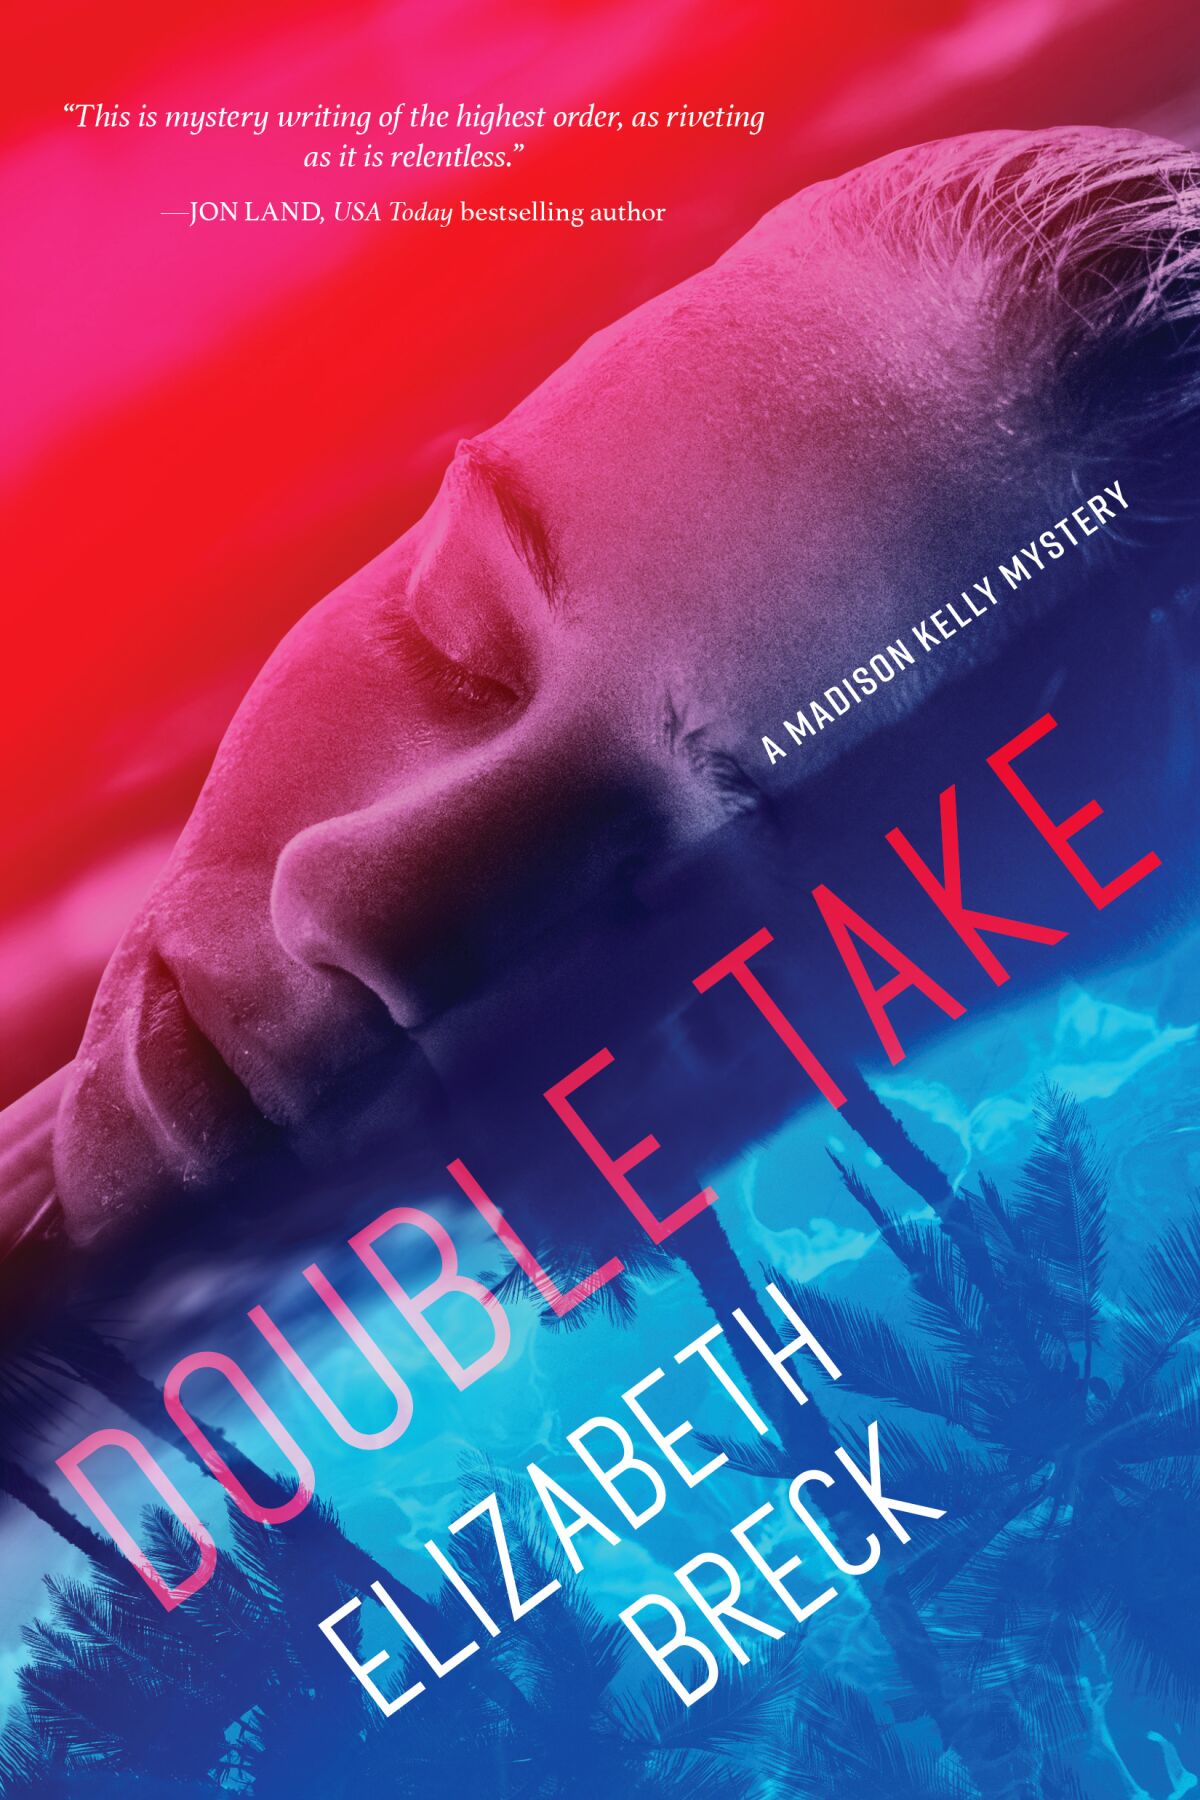 The cover of the book "Double Take"